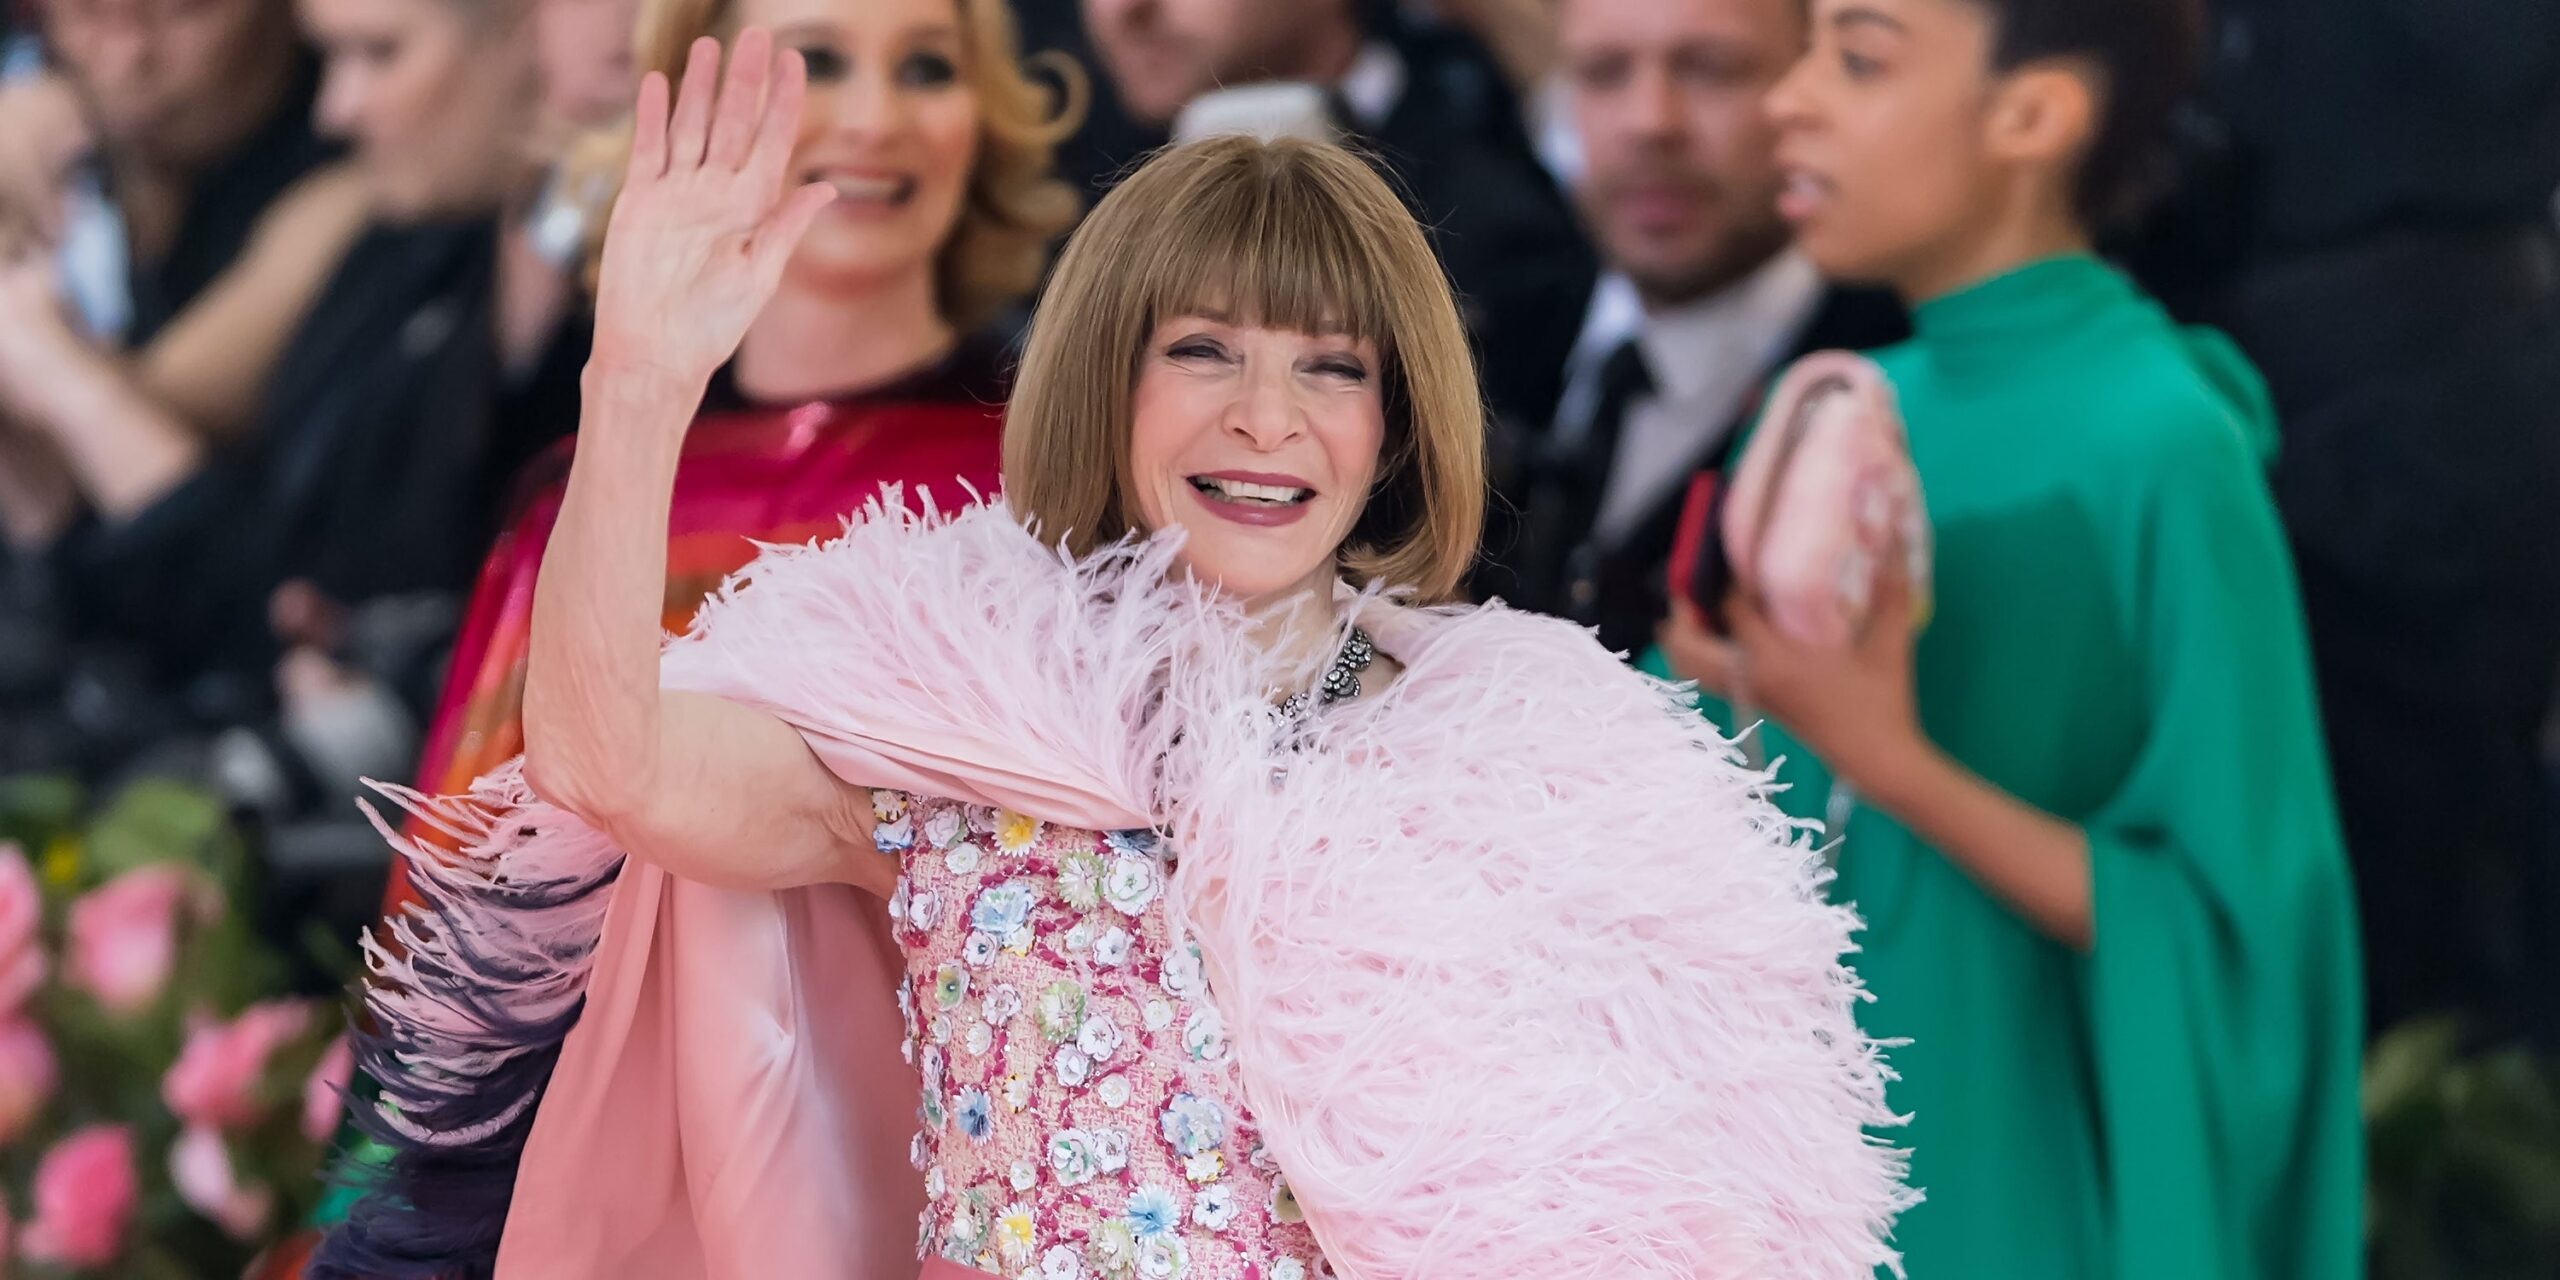 Met Gala Is Back And Here’s What You Need To Know